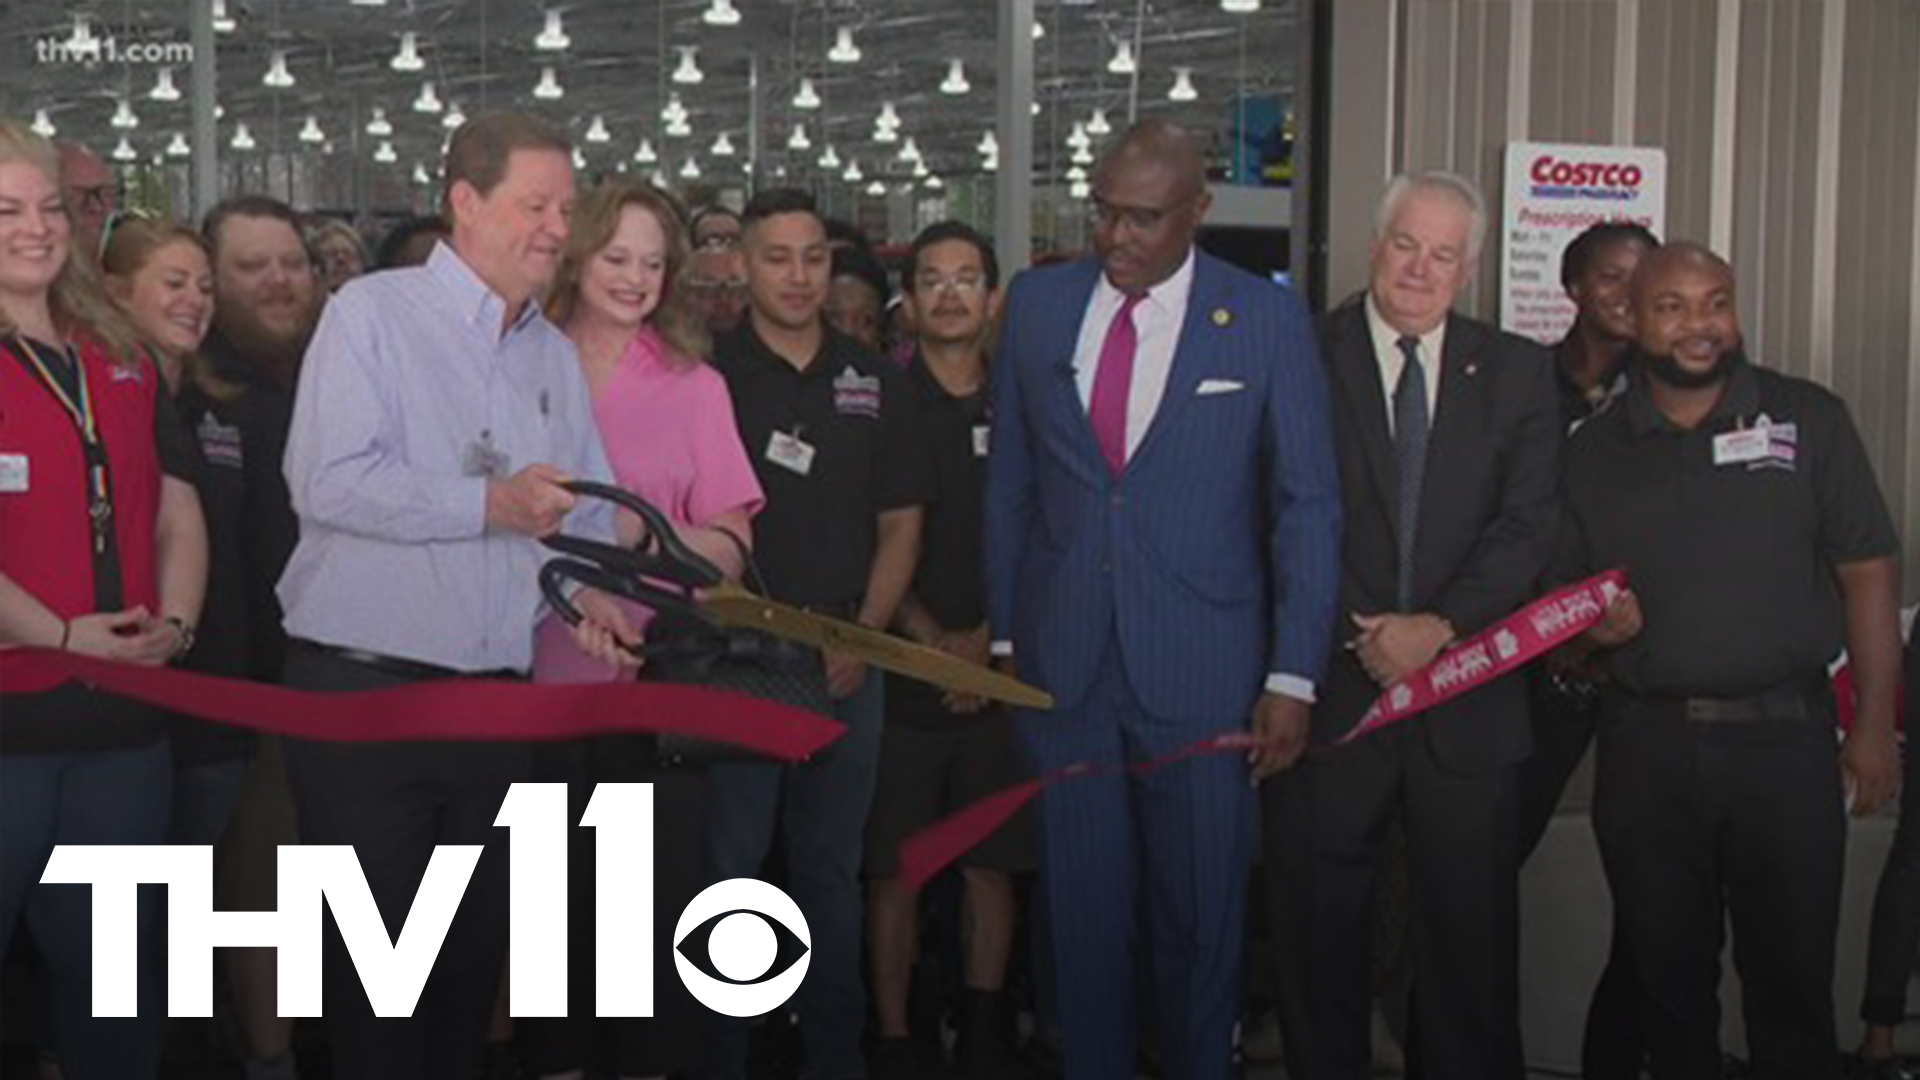 Costco opened its first Arkansas location in West Little Rock this morning. One Little Rock business is bringing back its COVID restrictions as cases rise.